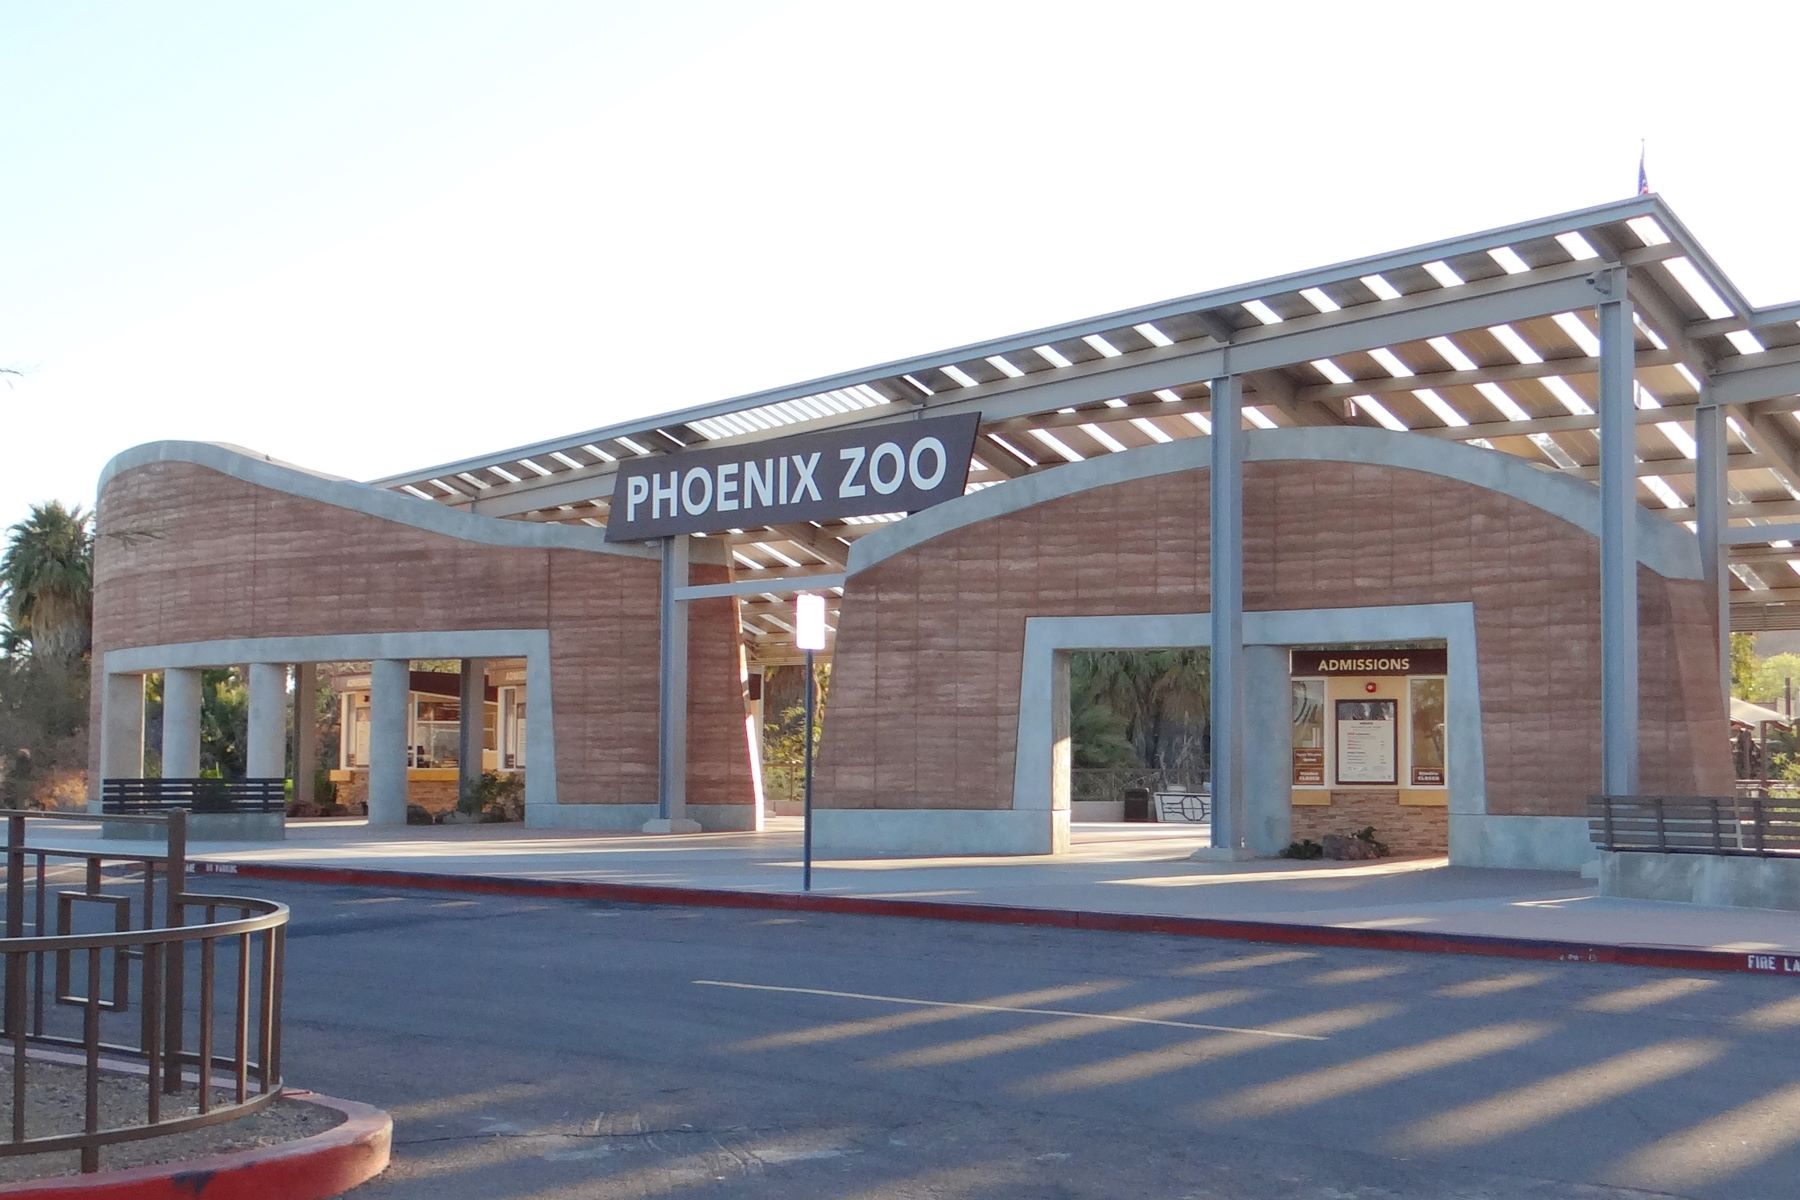 8-intriguing-facts-about-phoenix-zoo